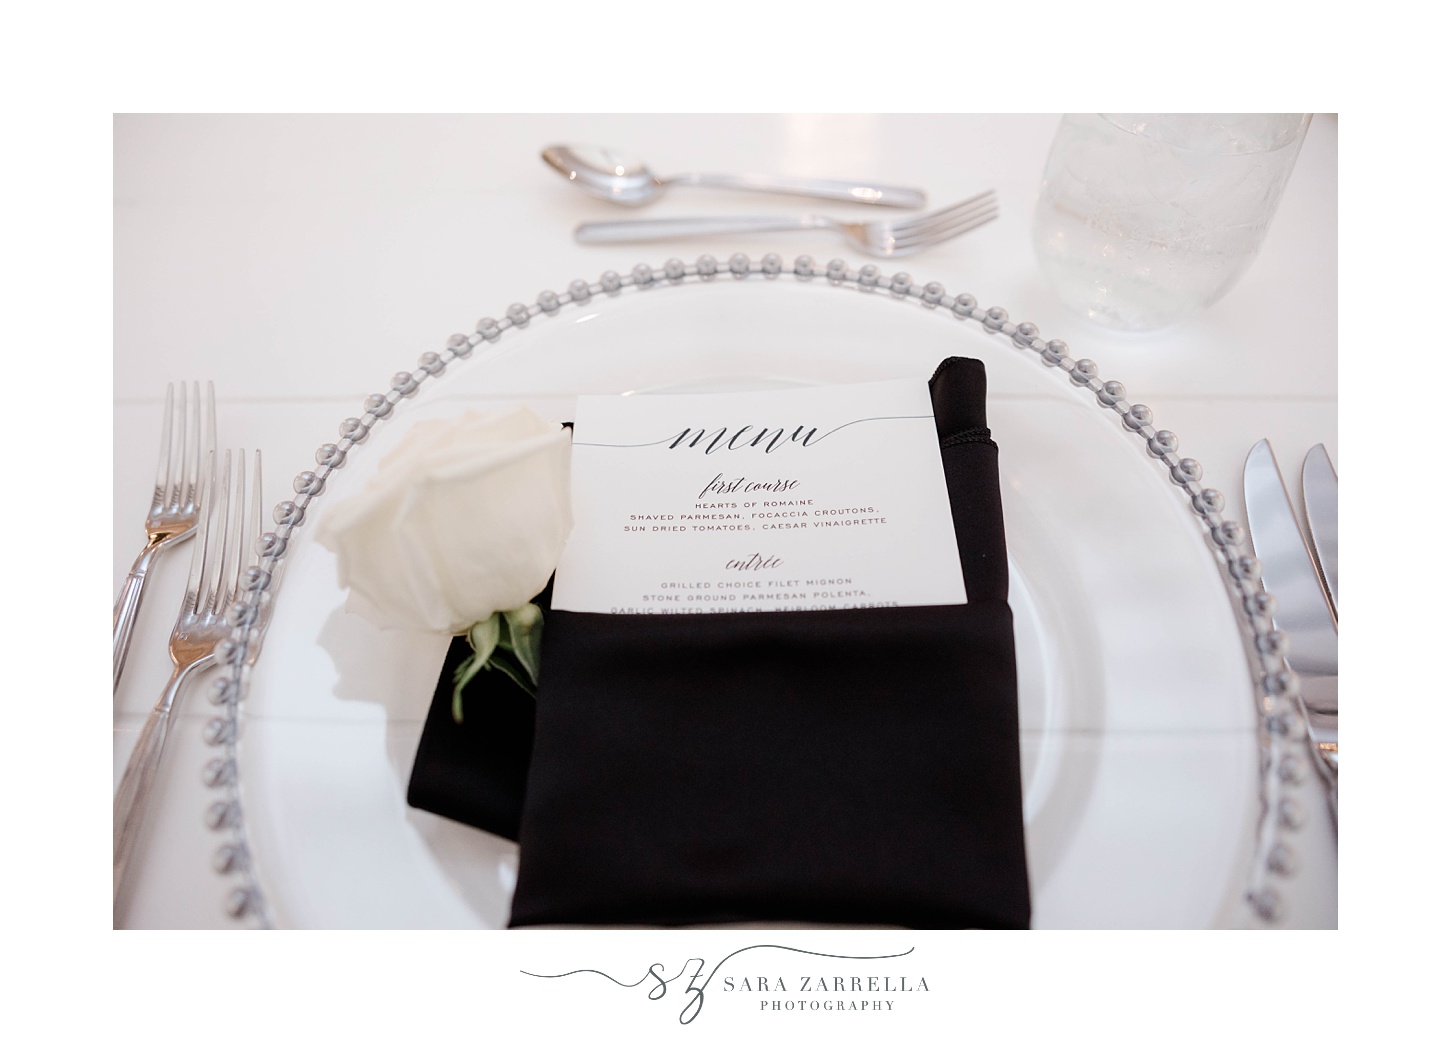 place setting on plate with silver rim and black napkin